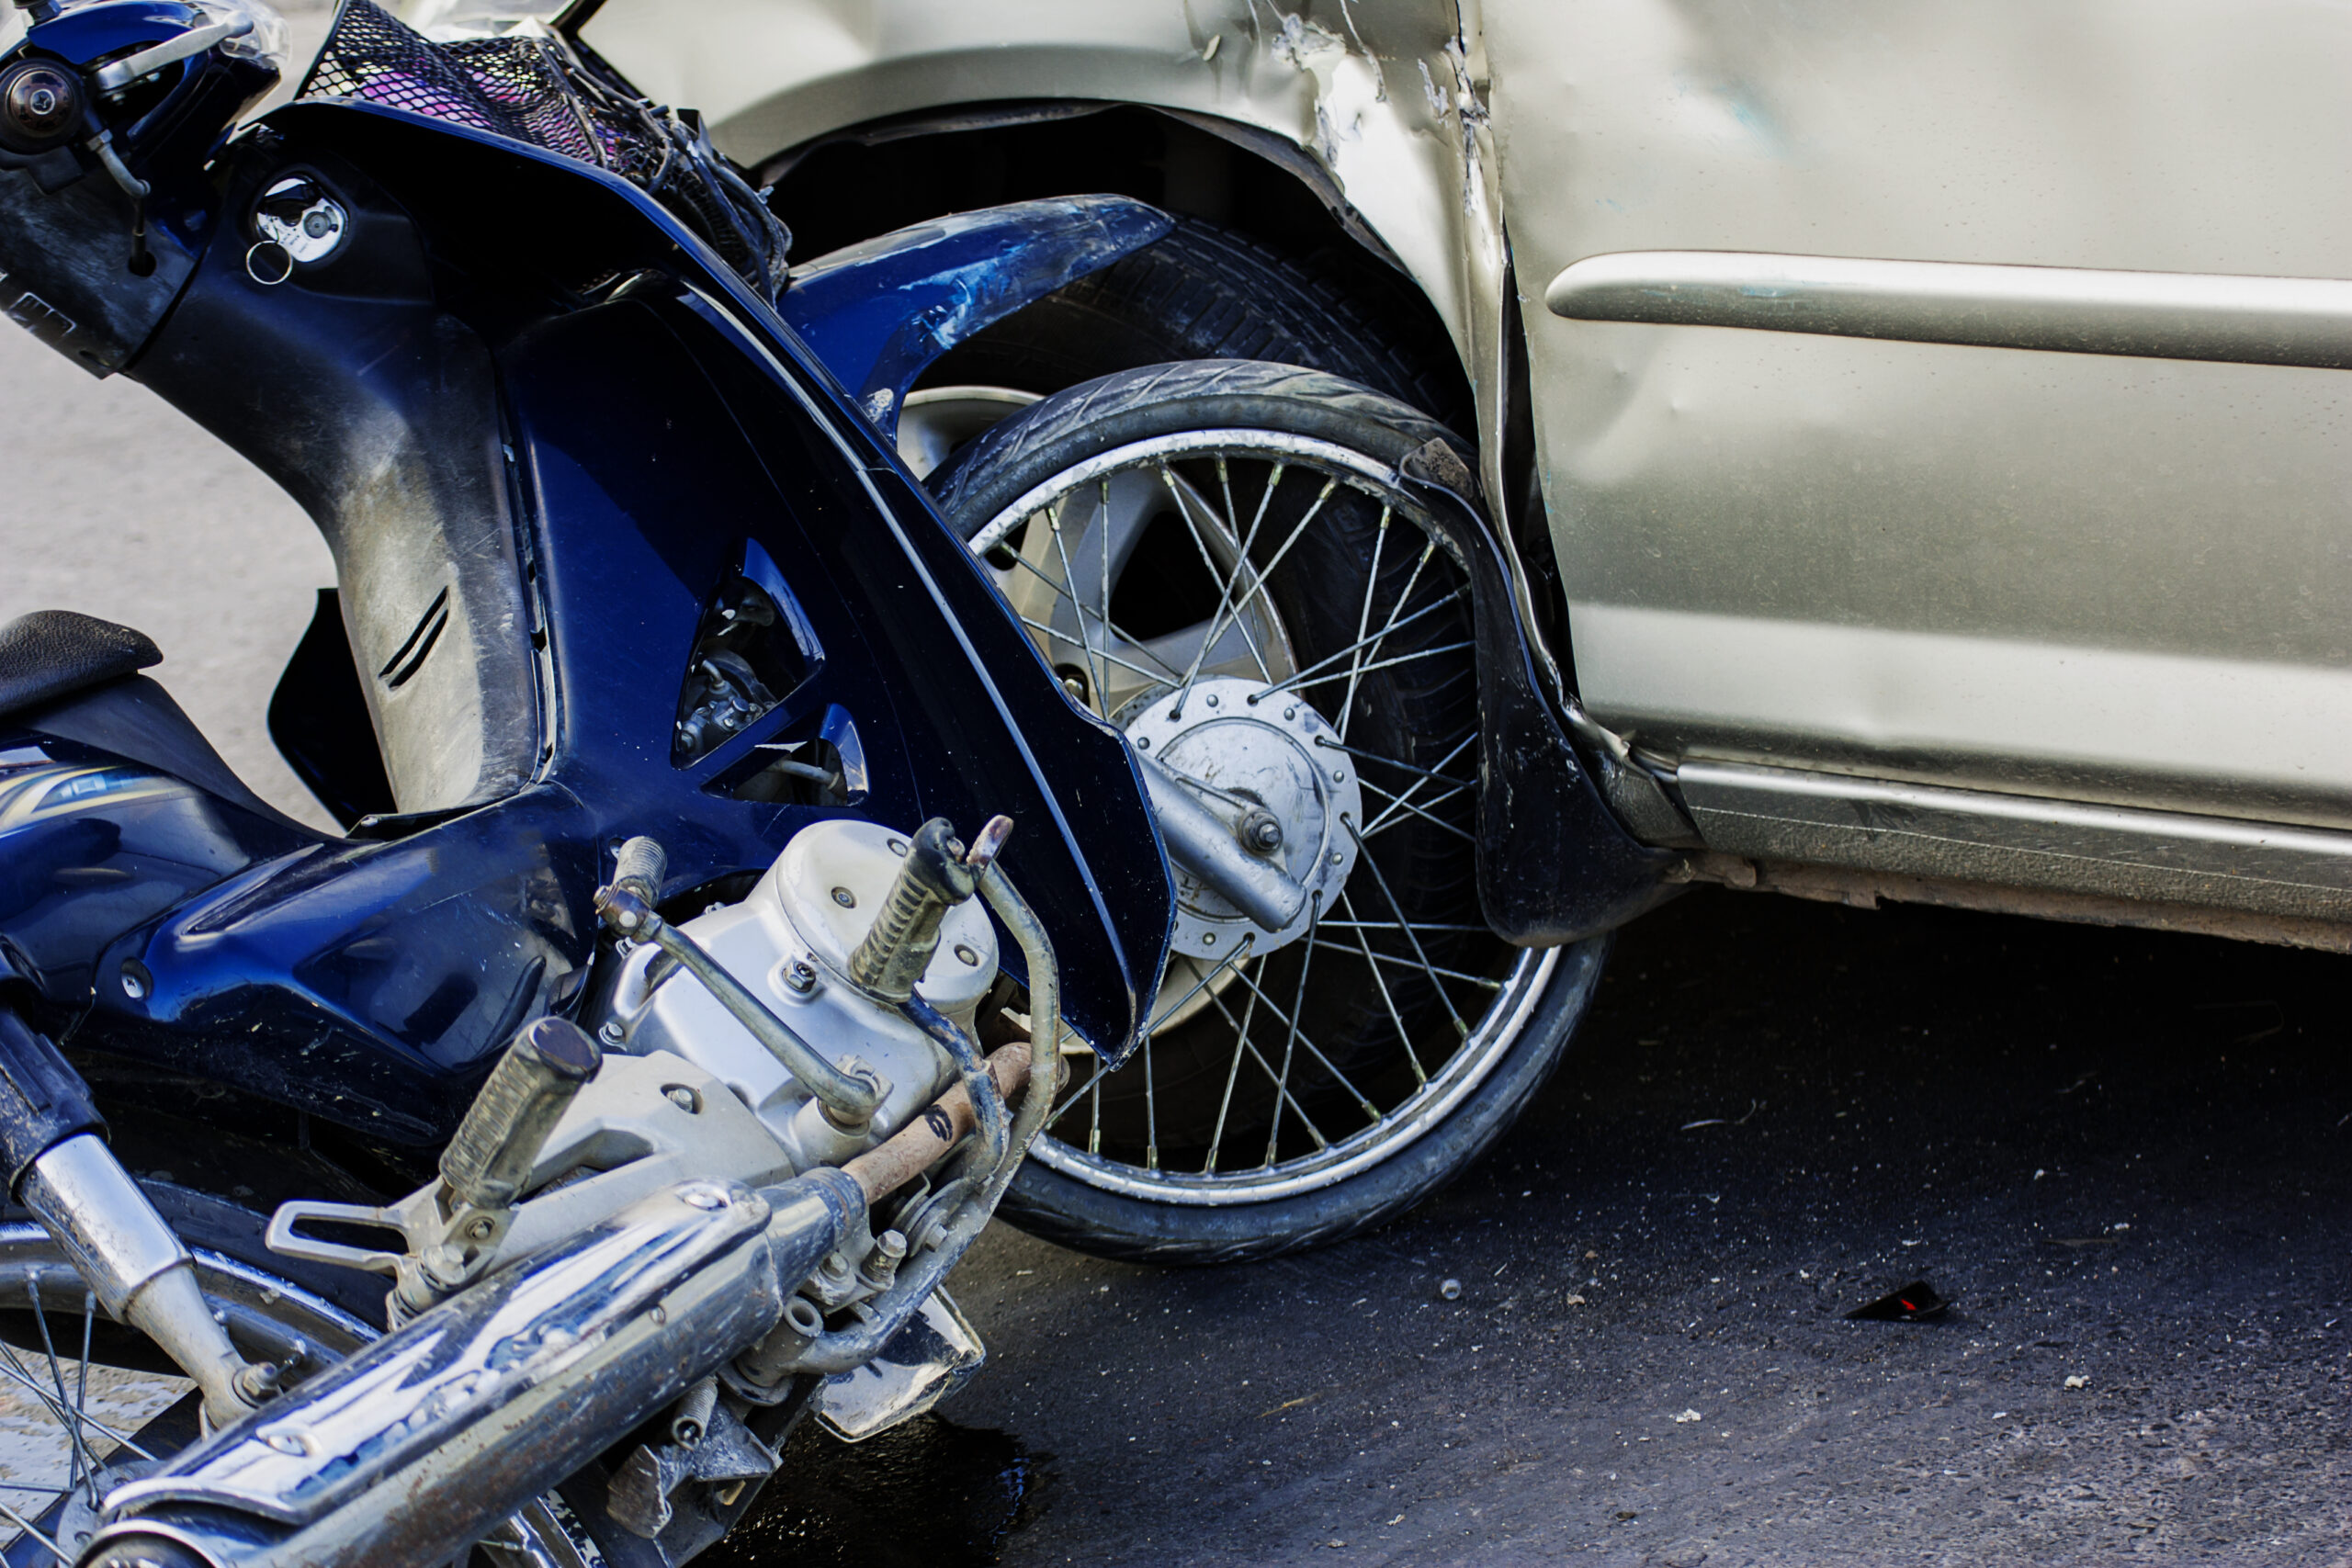 Factors That Impact Compensation In Motorcycle Accident Cases